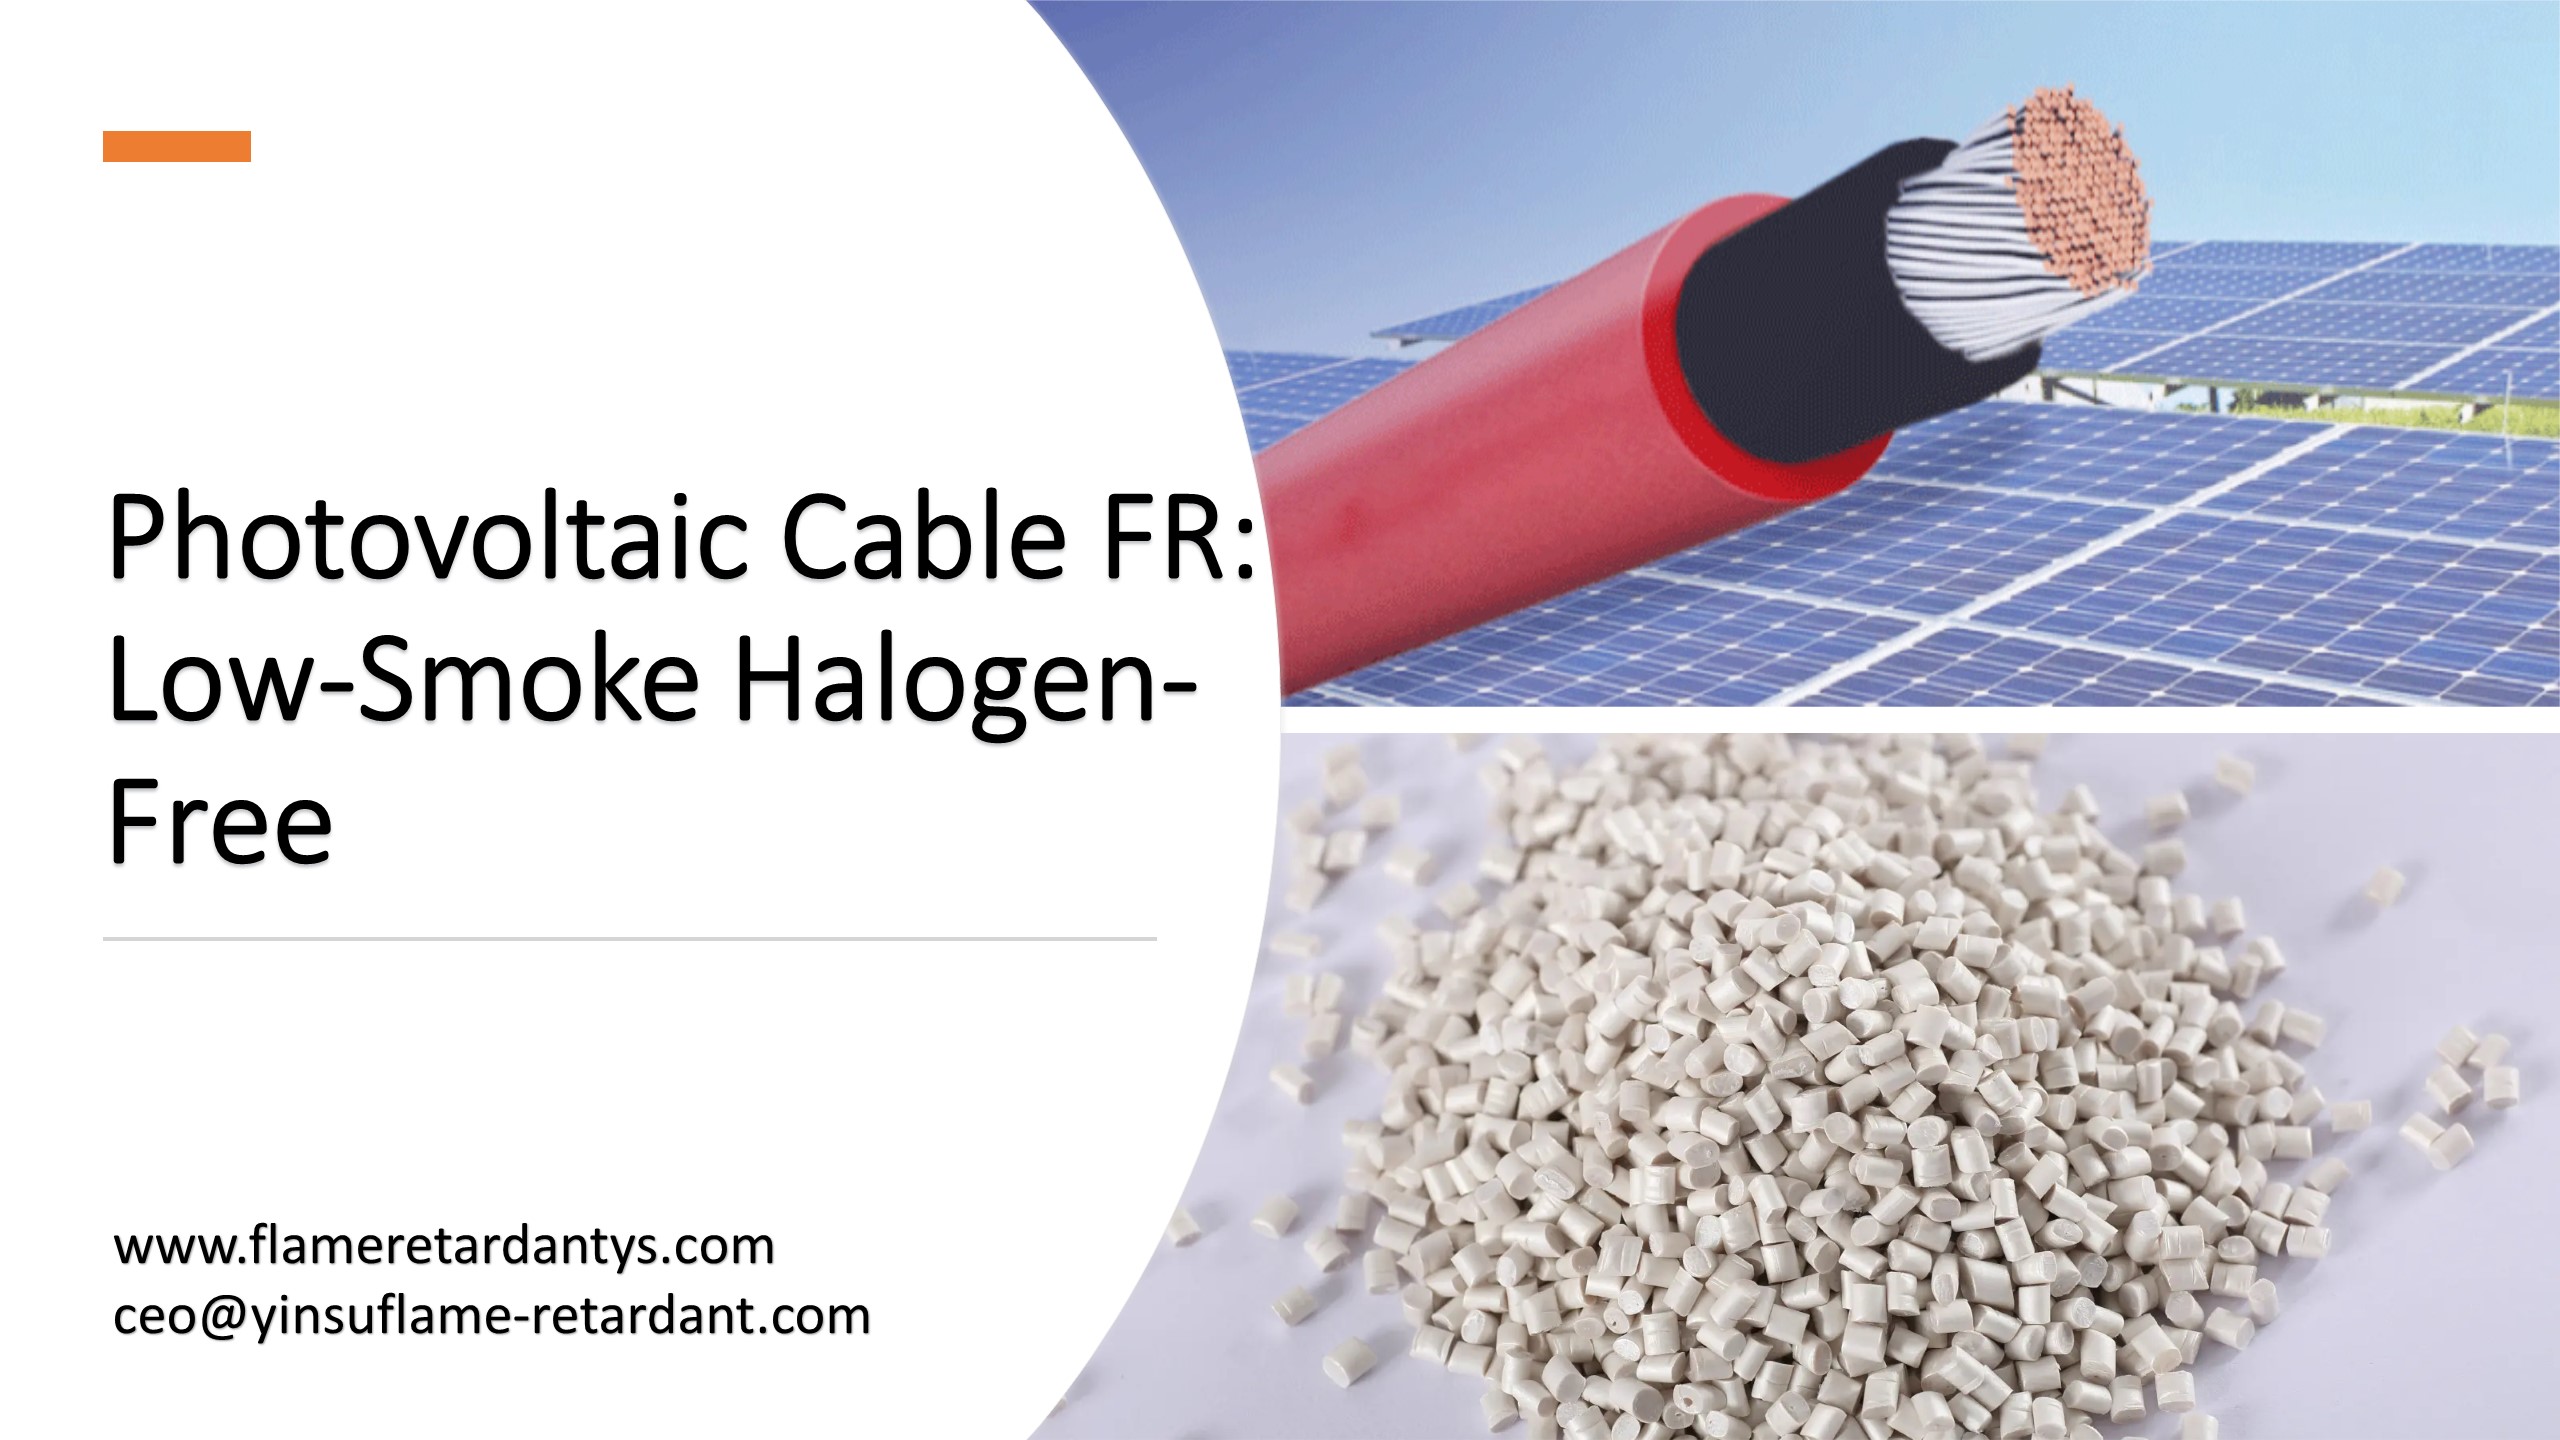 Photovoltaic Cable FR Low-Smoke Halogen-Free